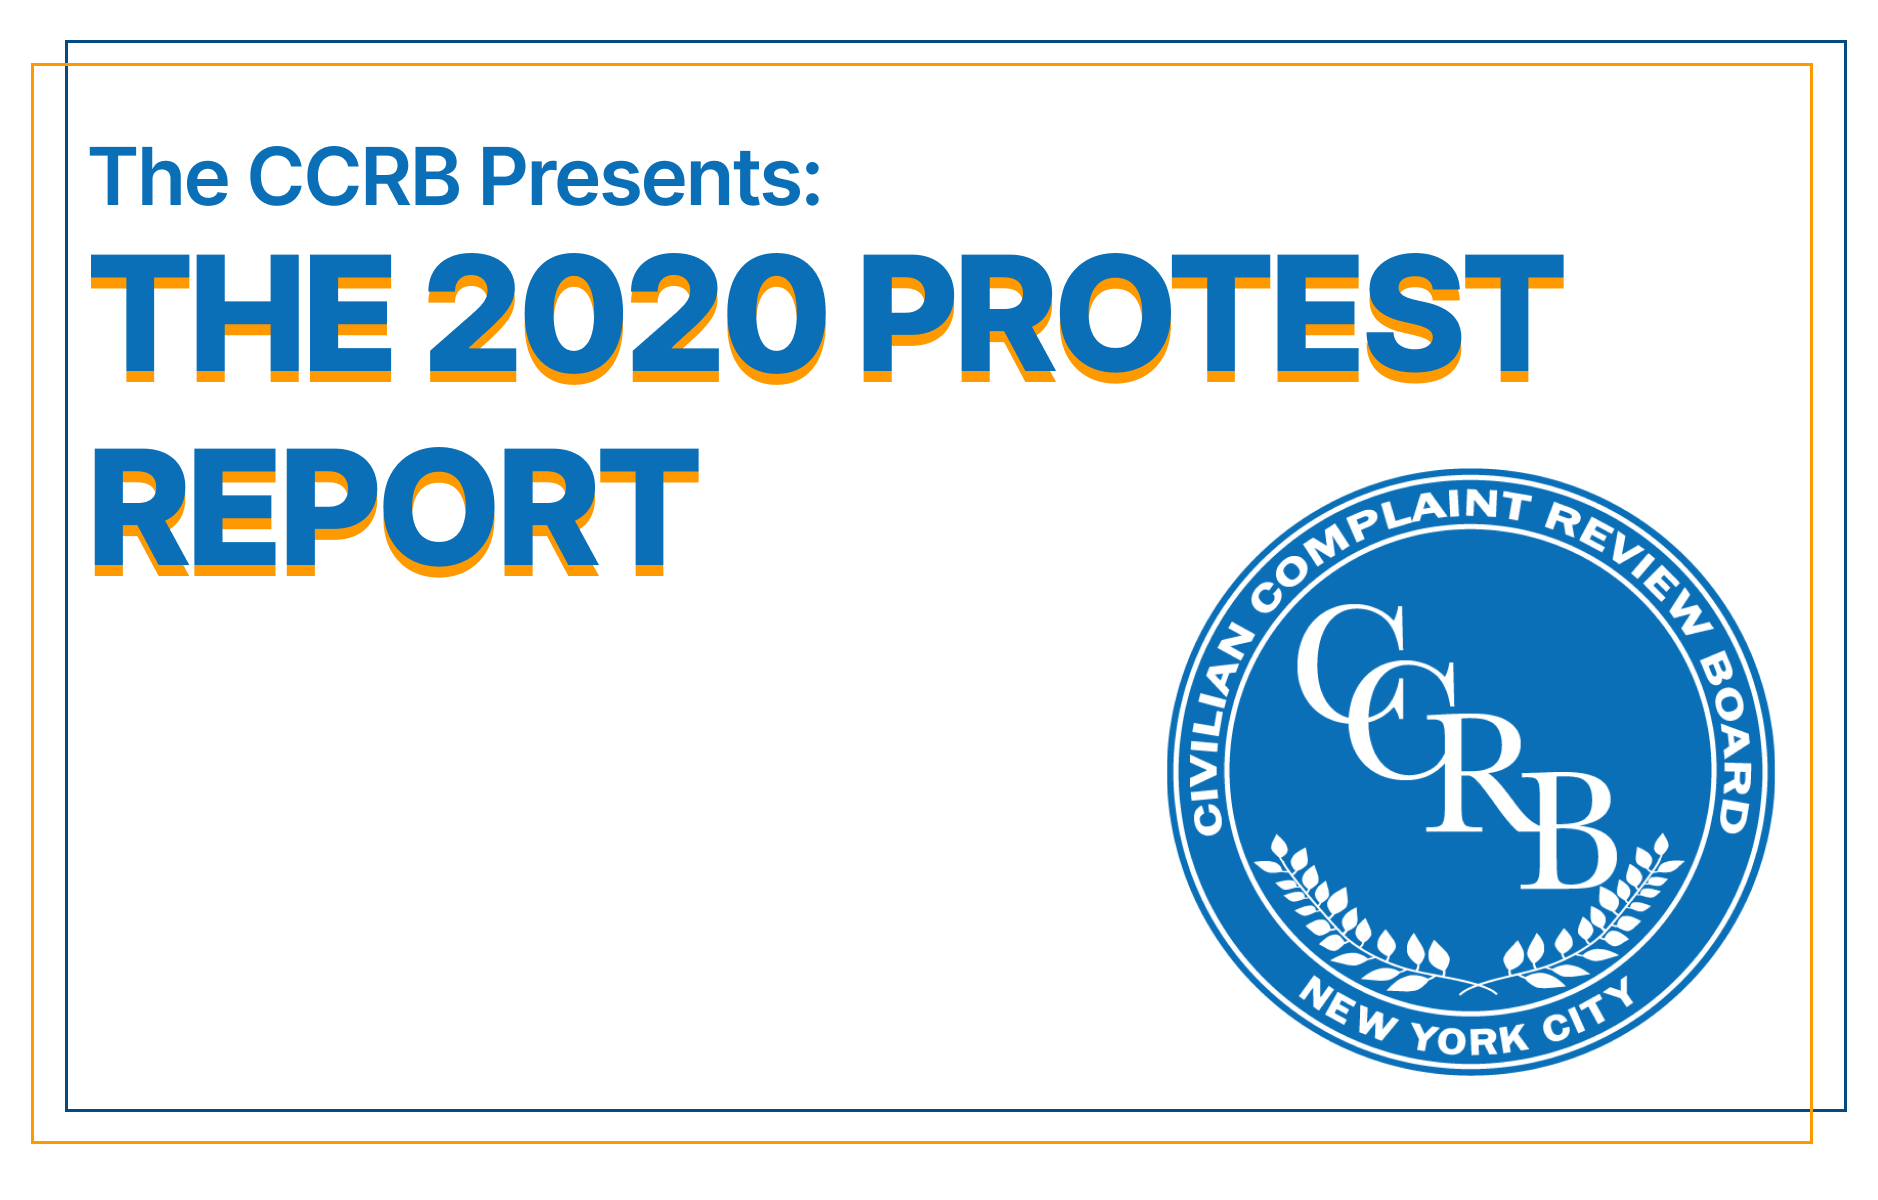 The CCRB presents the 2020 protest report. 
                                           